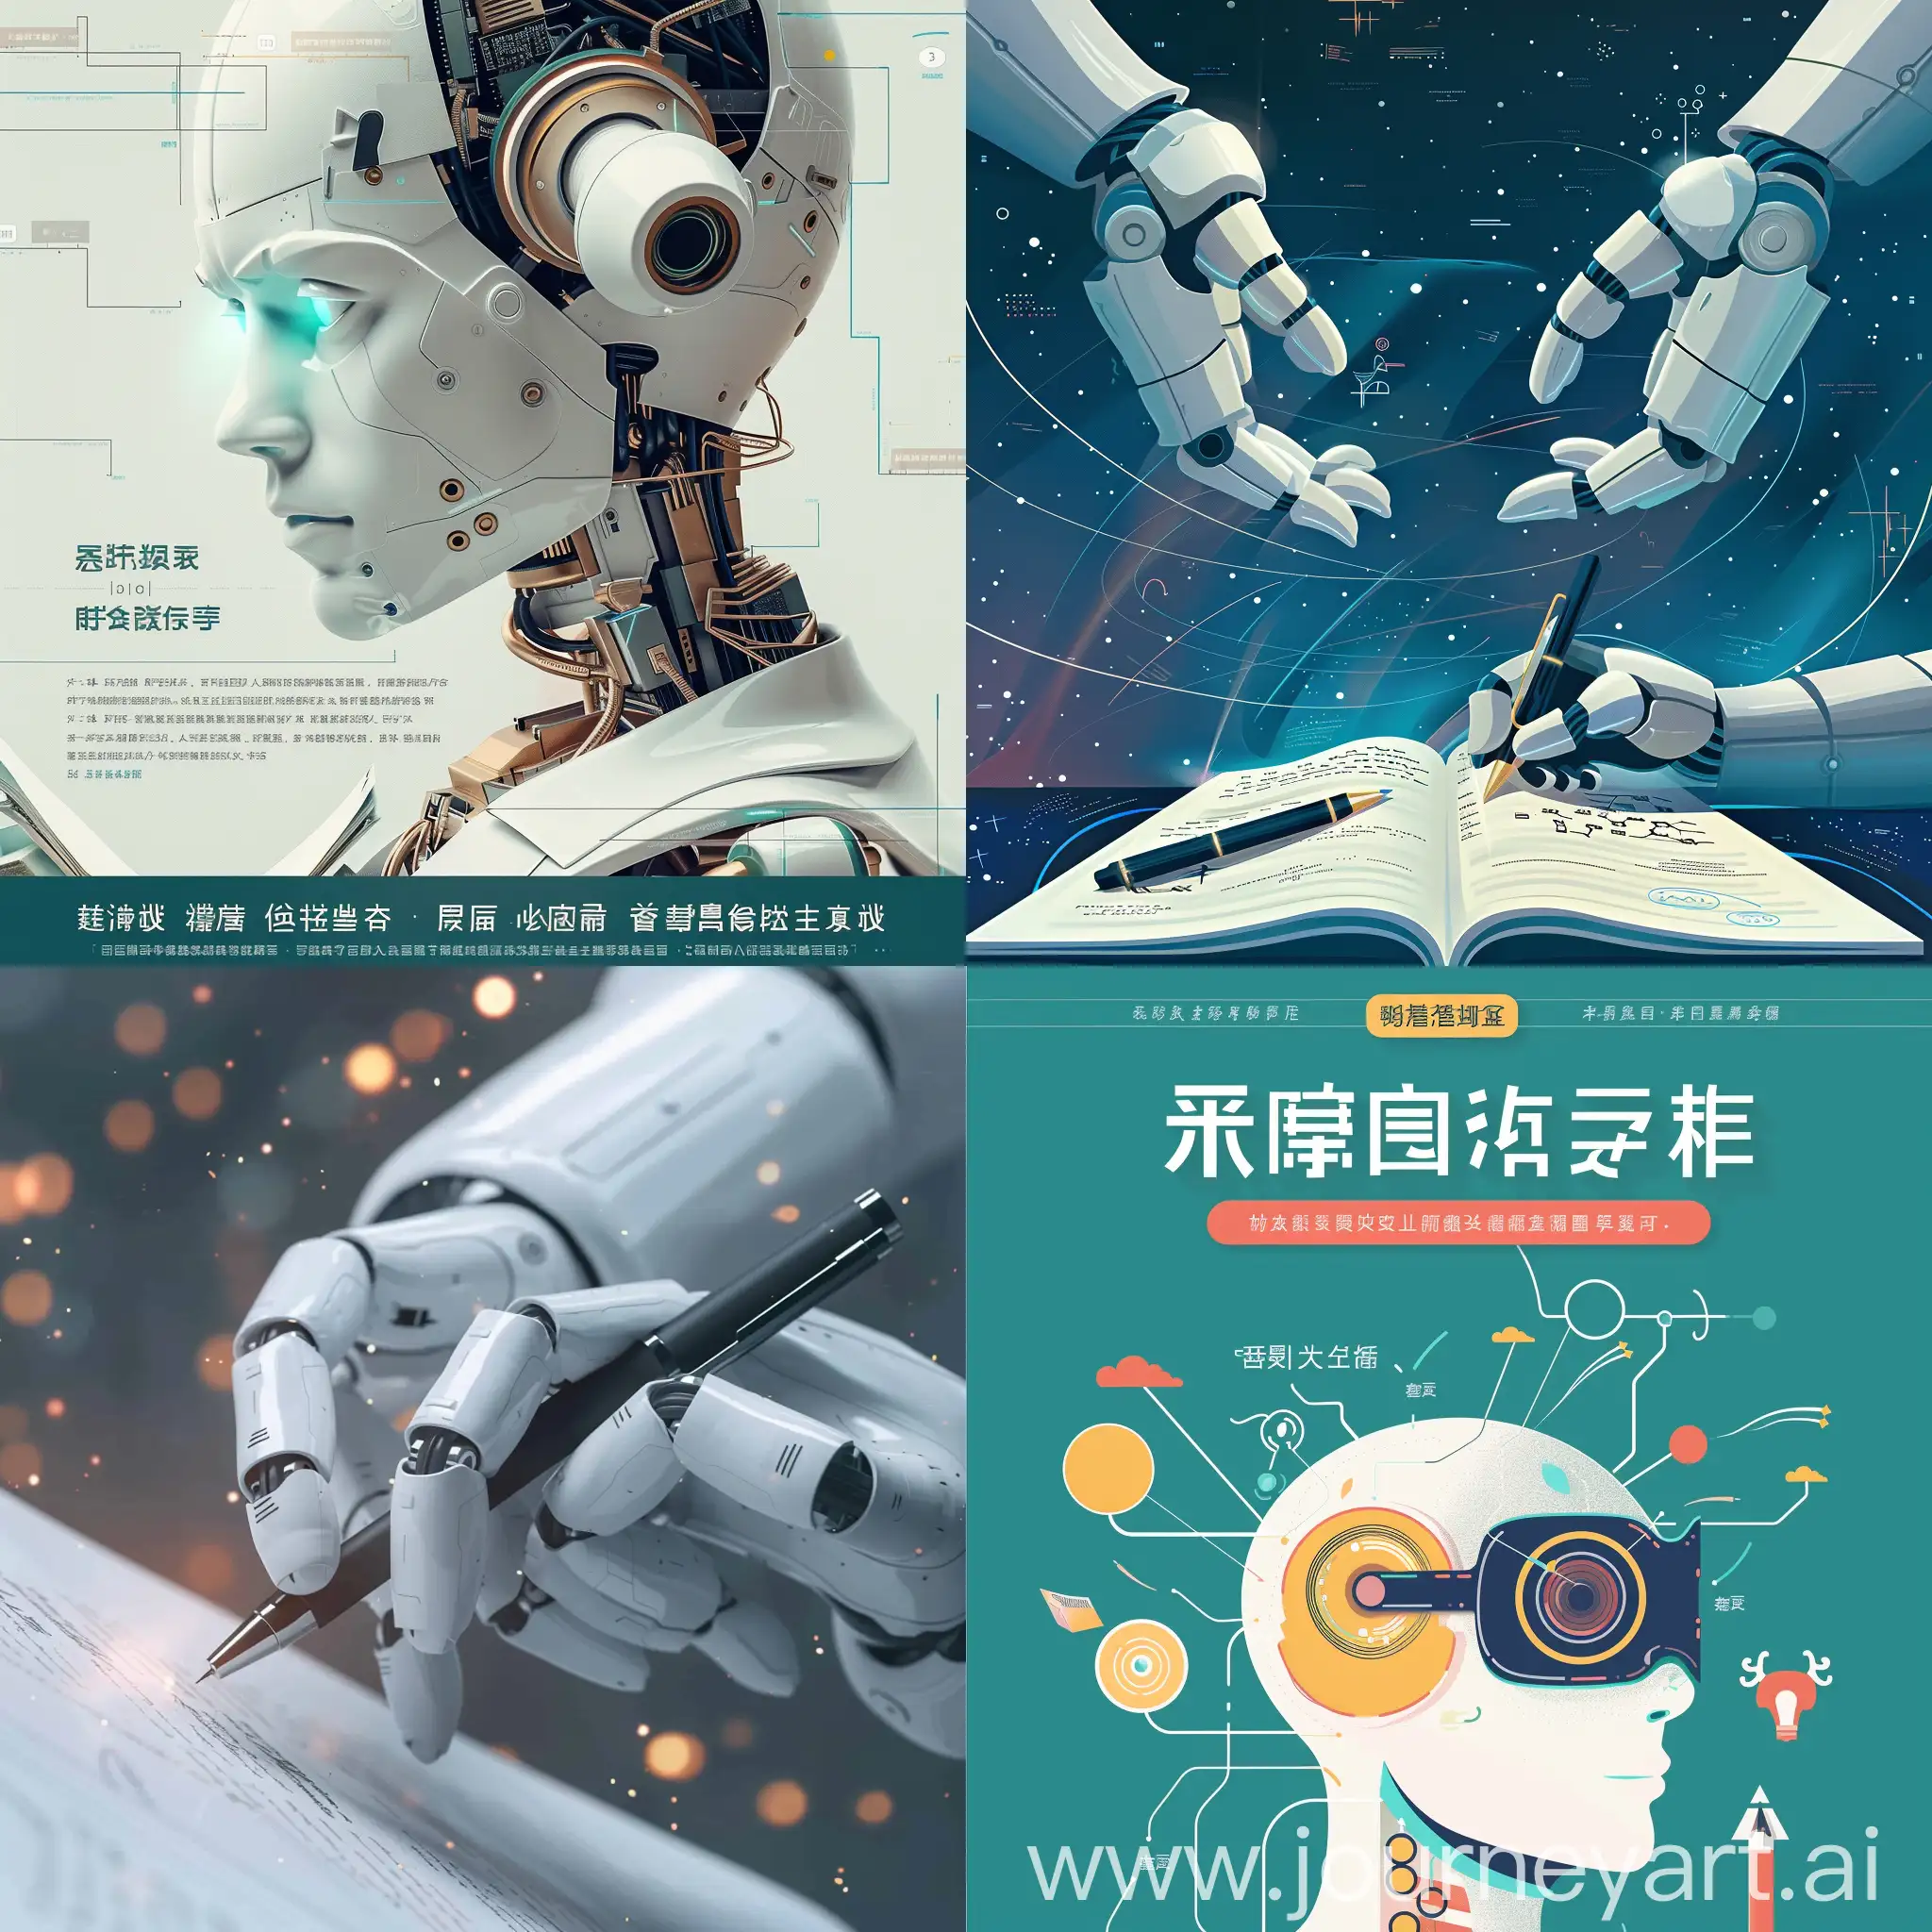 poster for Essay writing training with artificial intelligence course